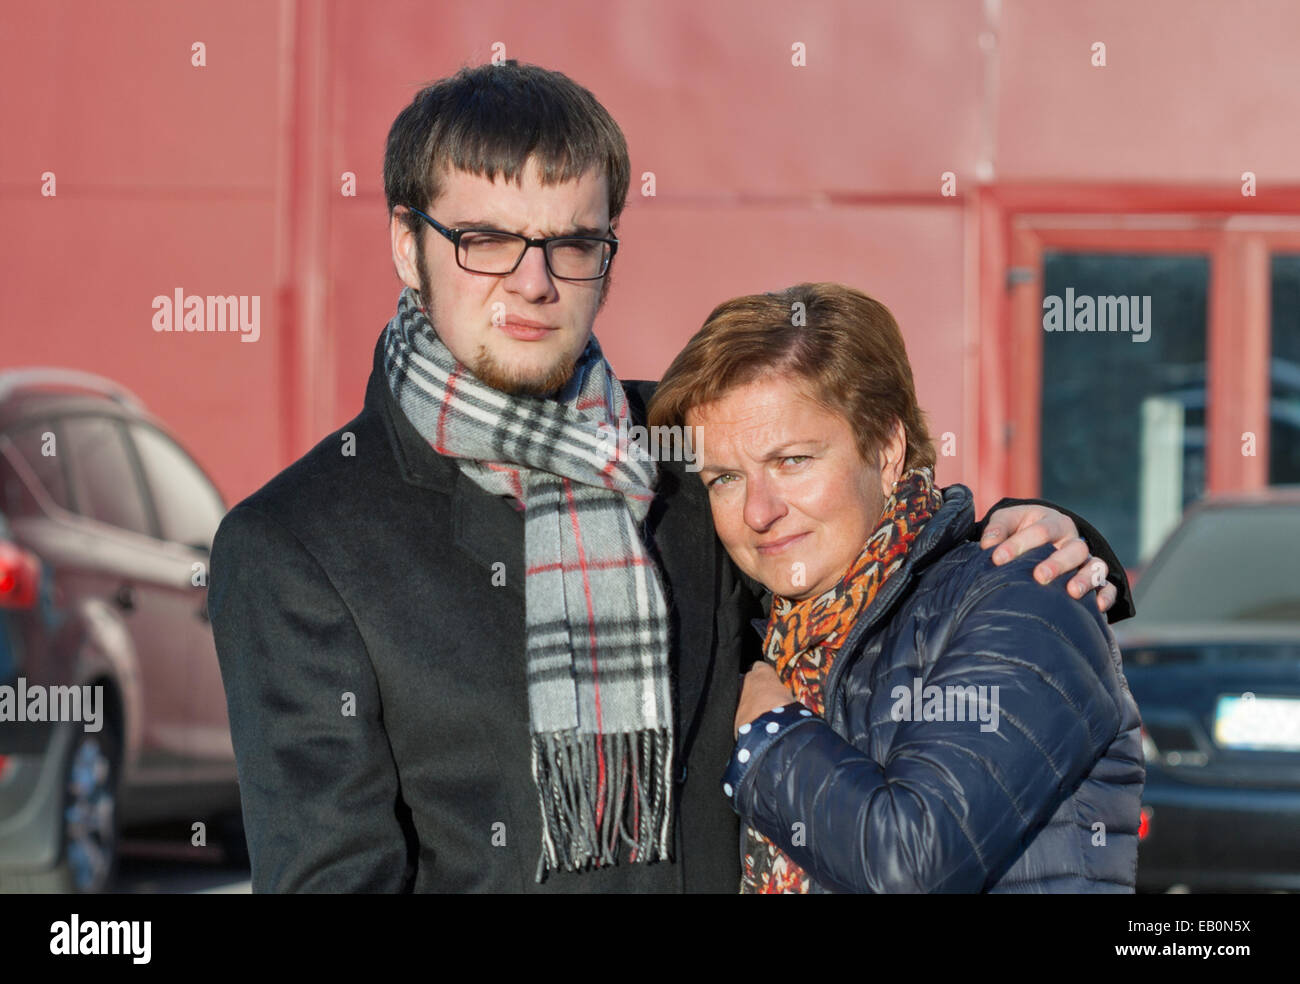 mother and son portrait in autumn clothing outdoor Stock Photo